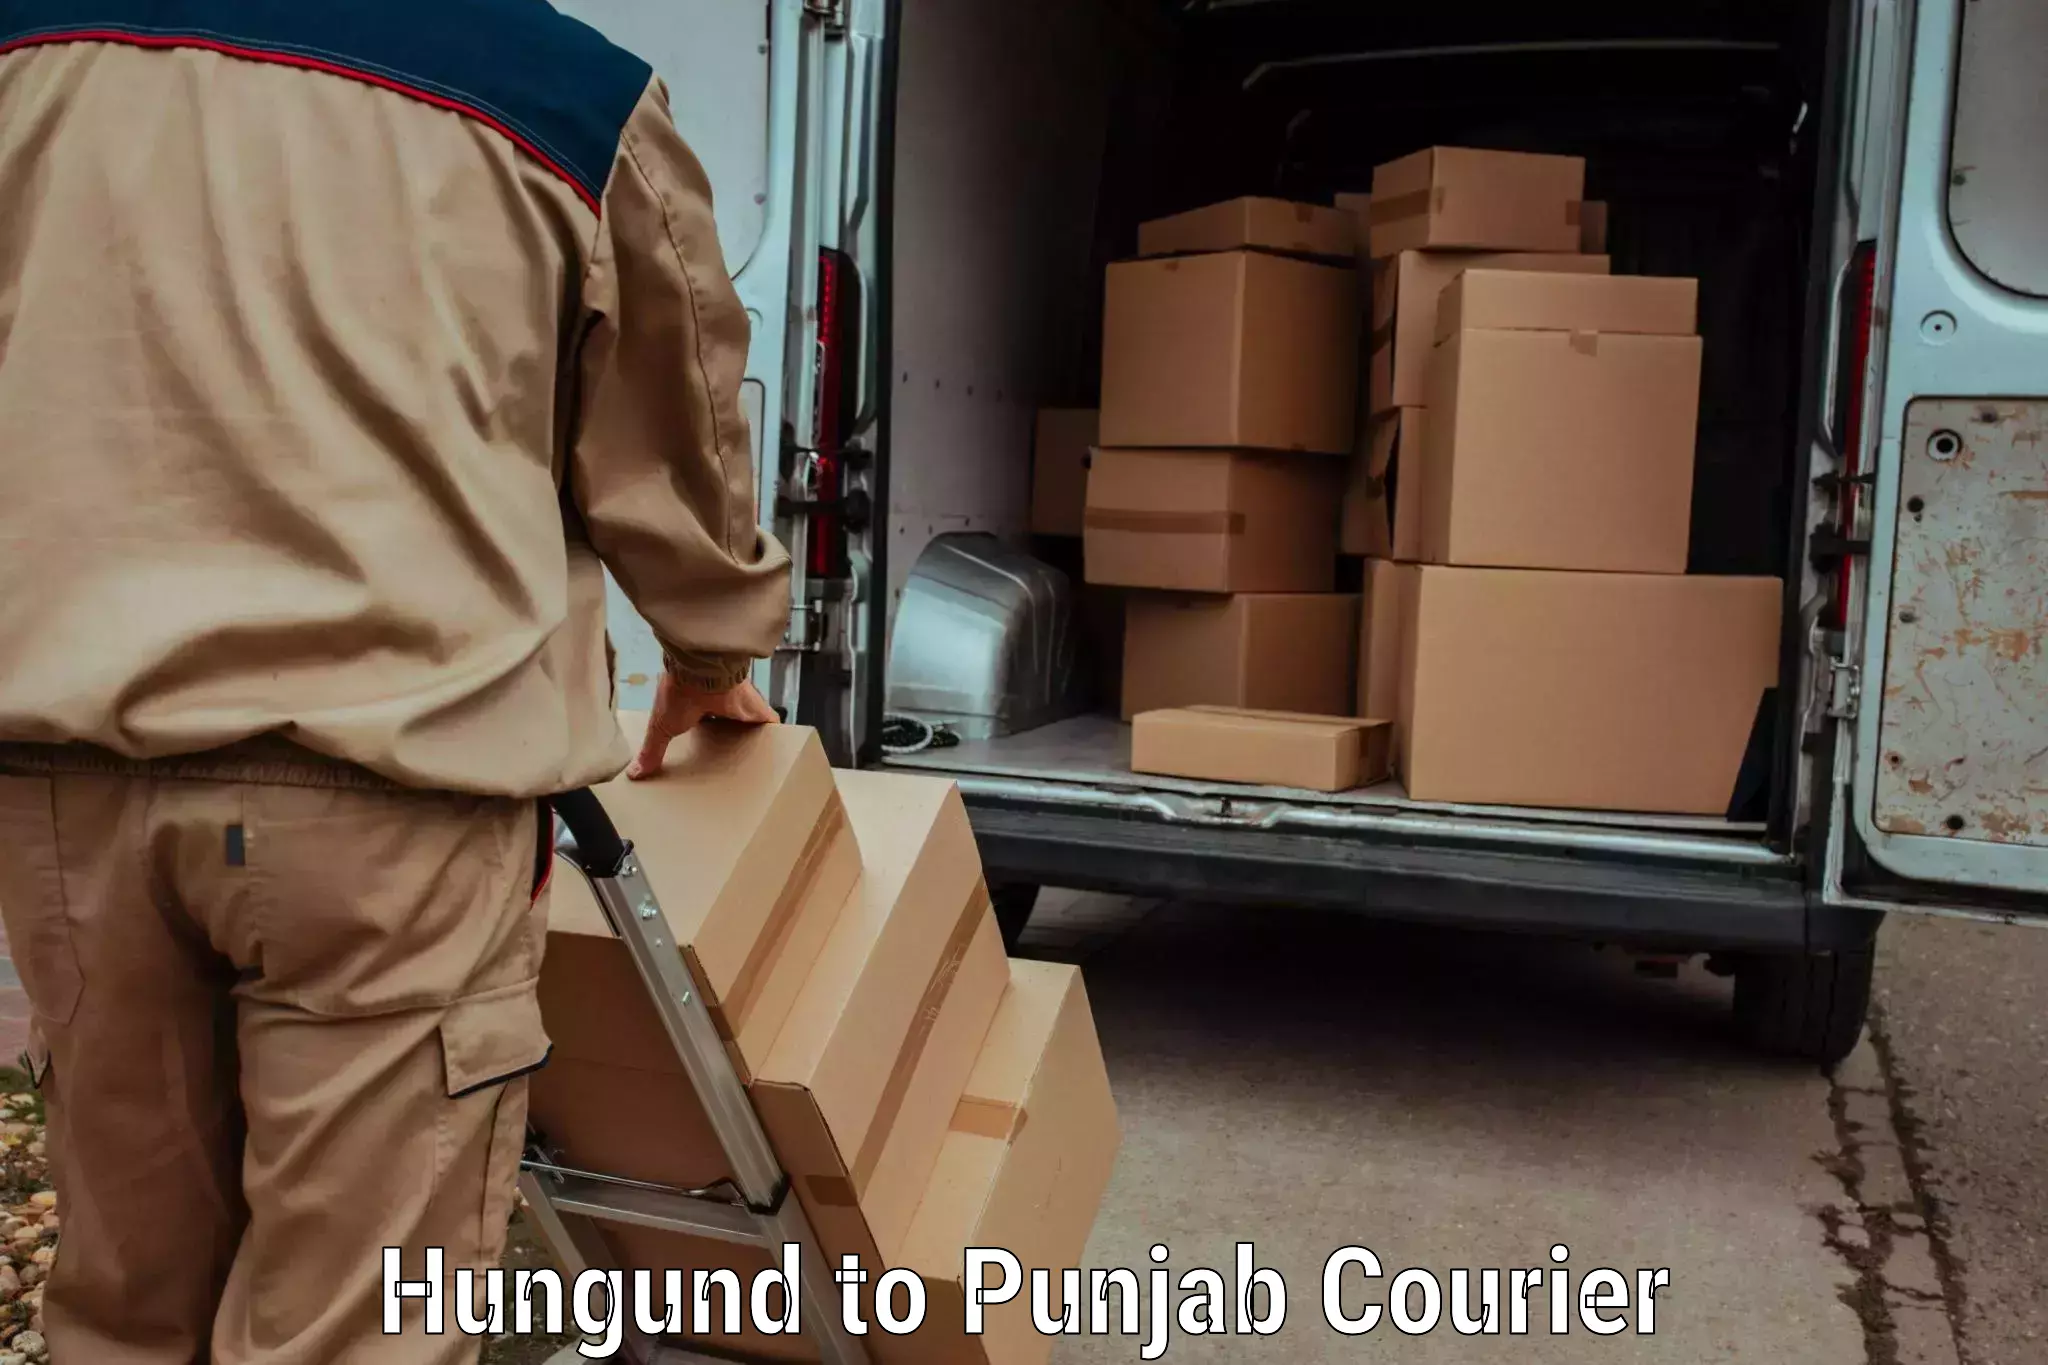 Courier service booking Hungund to Faridkot